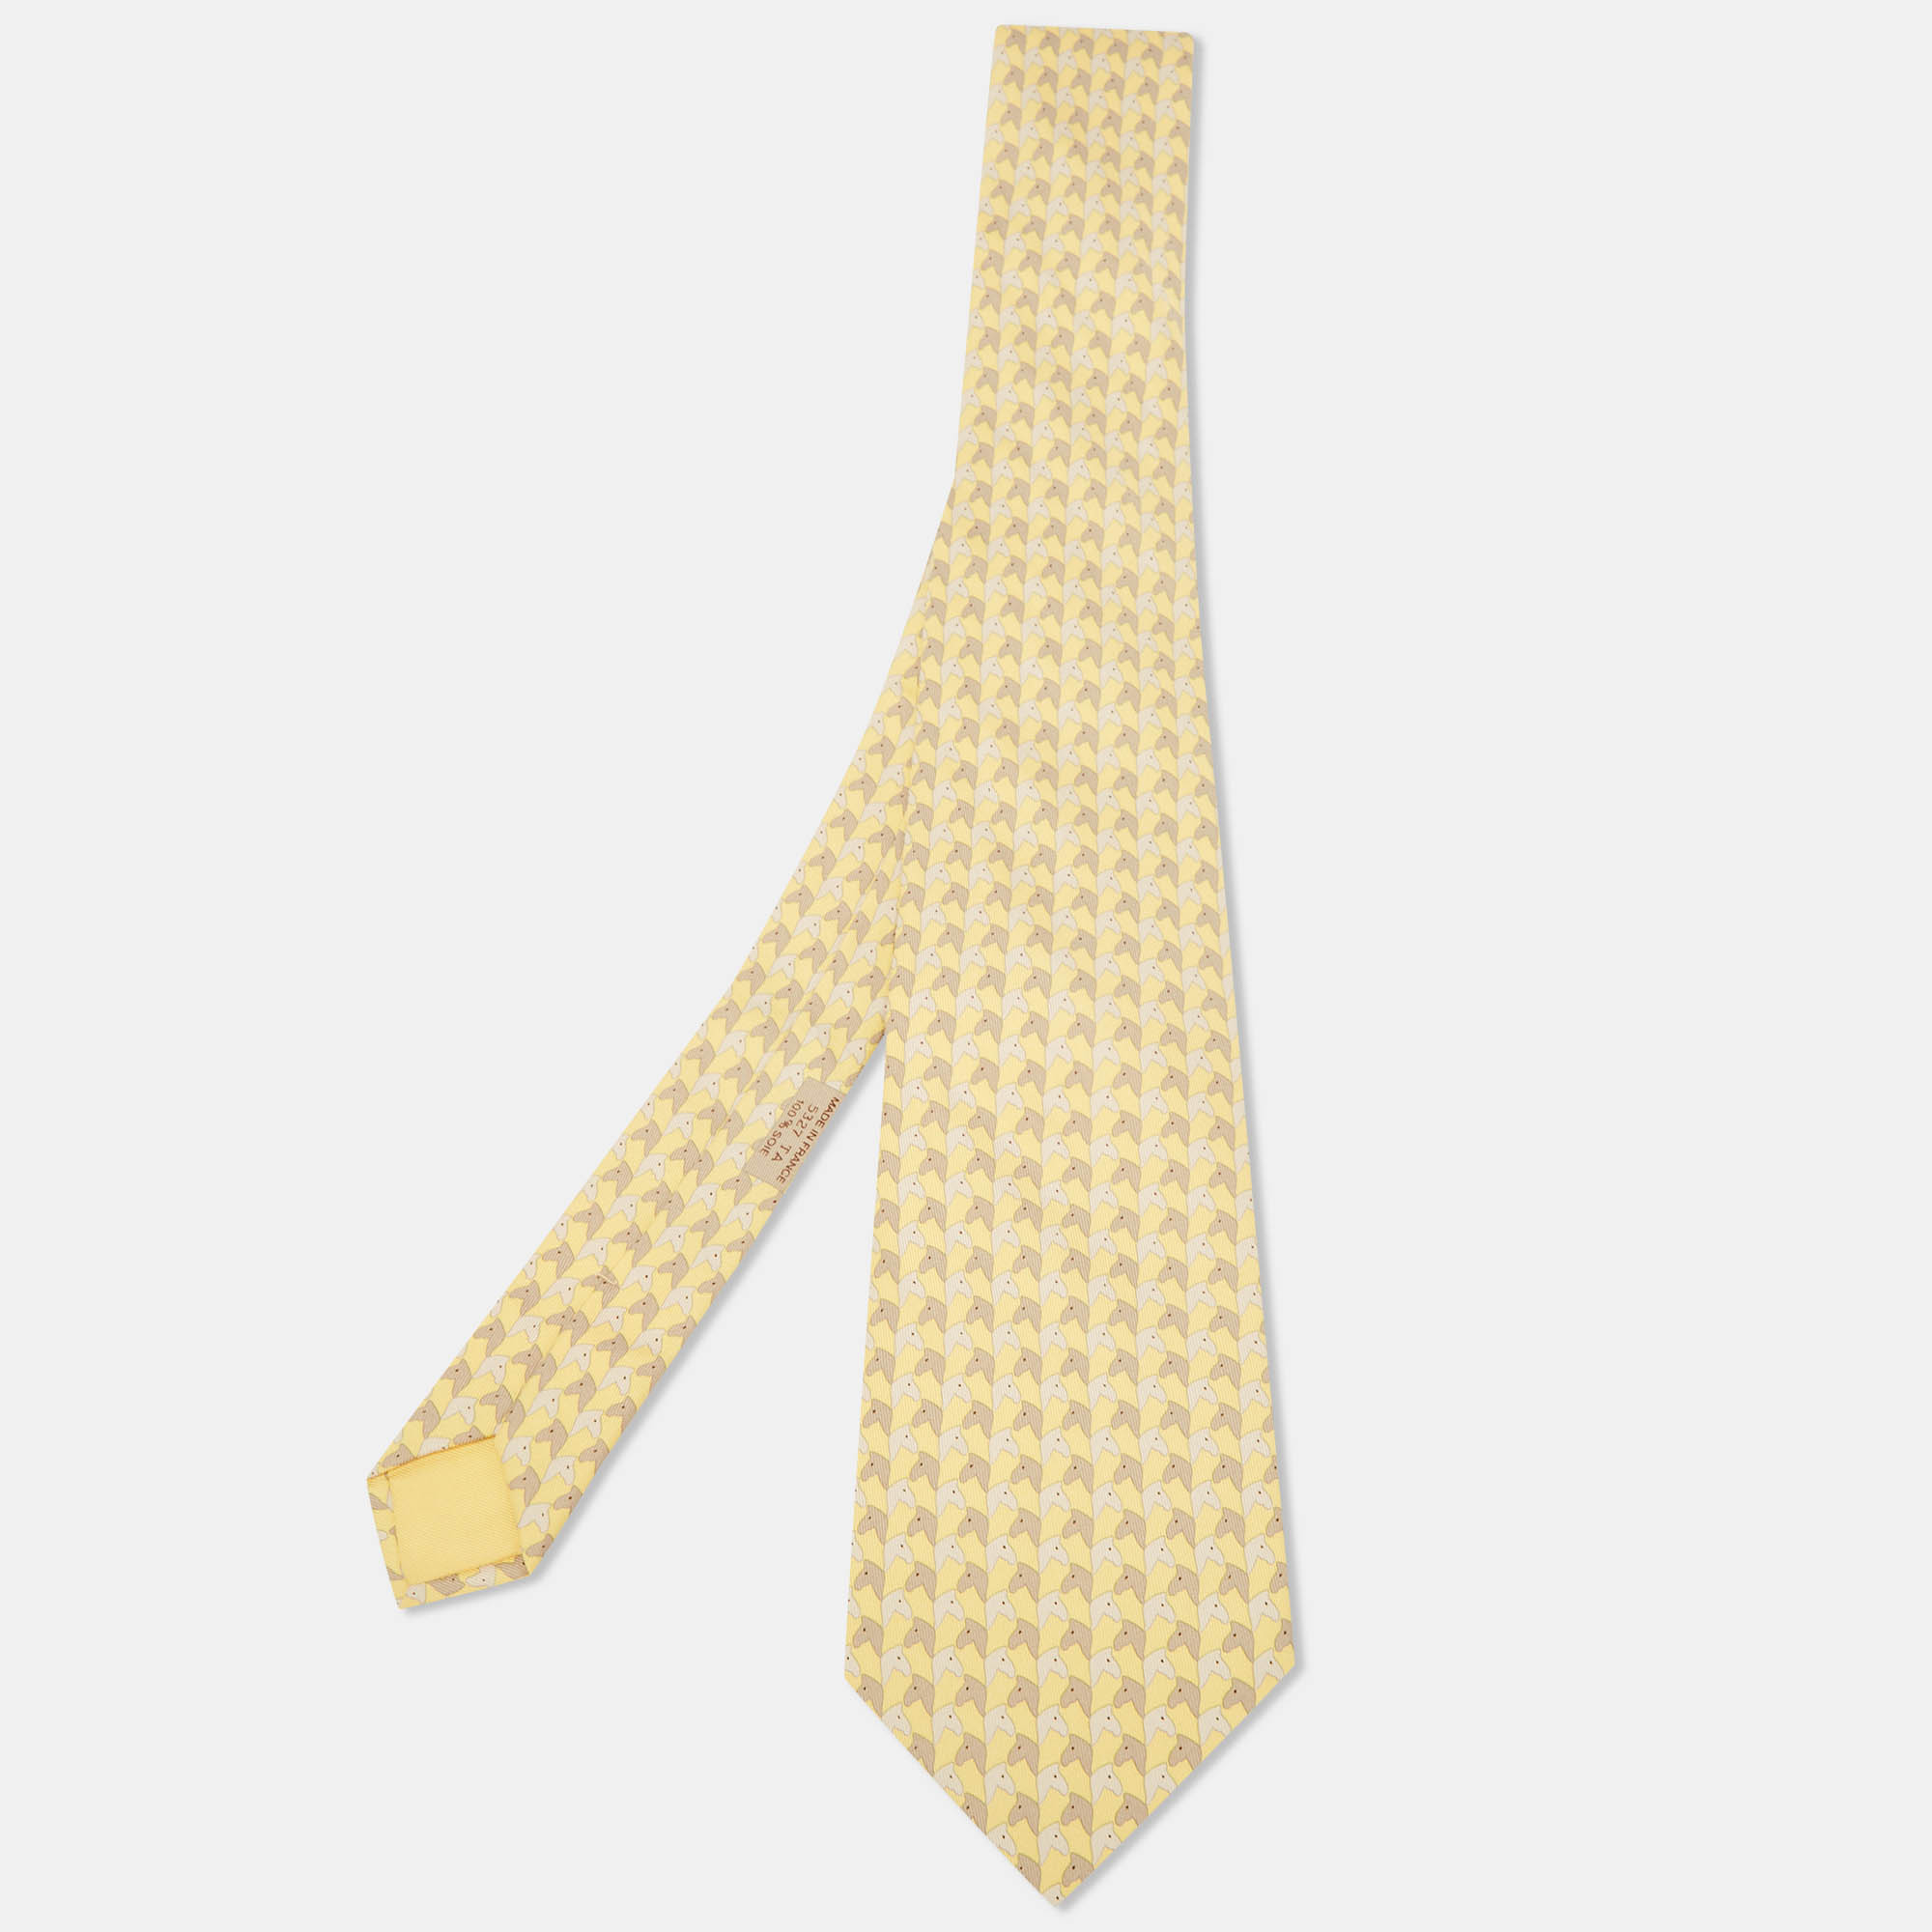 Hermes herm&egrave;s yellow horse print silk traditional tie